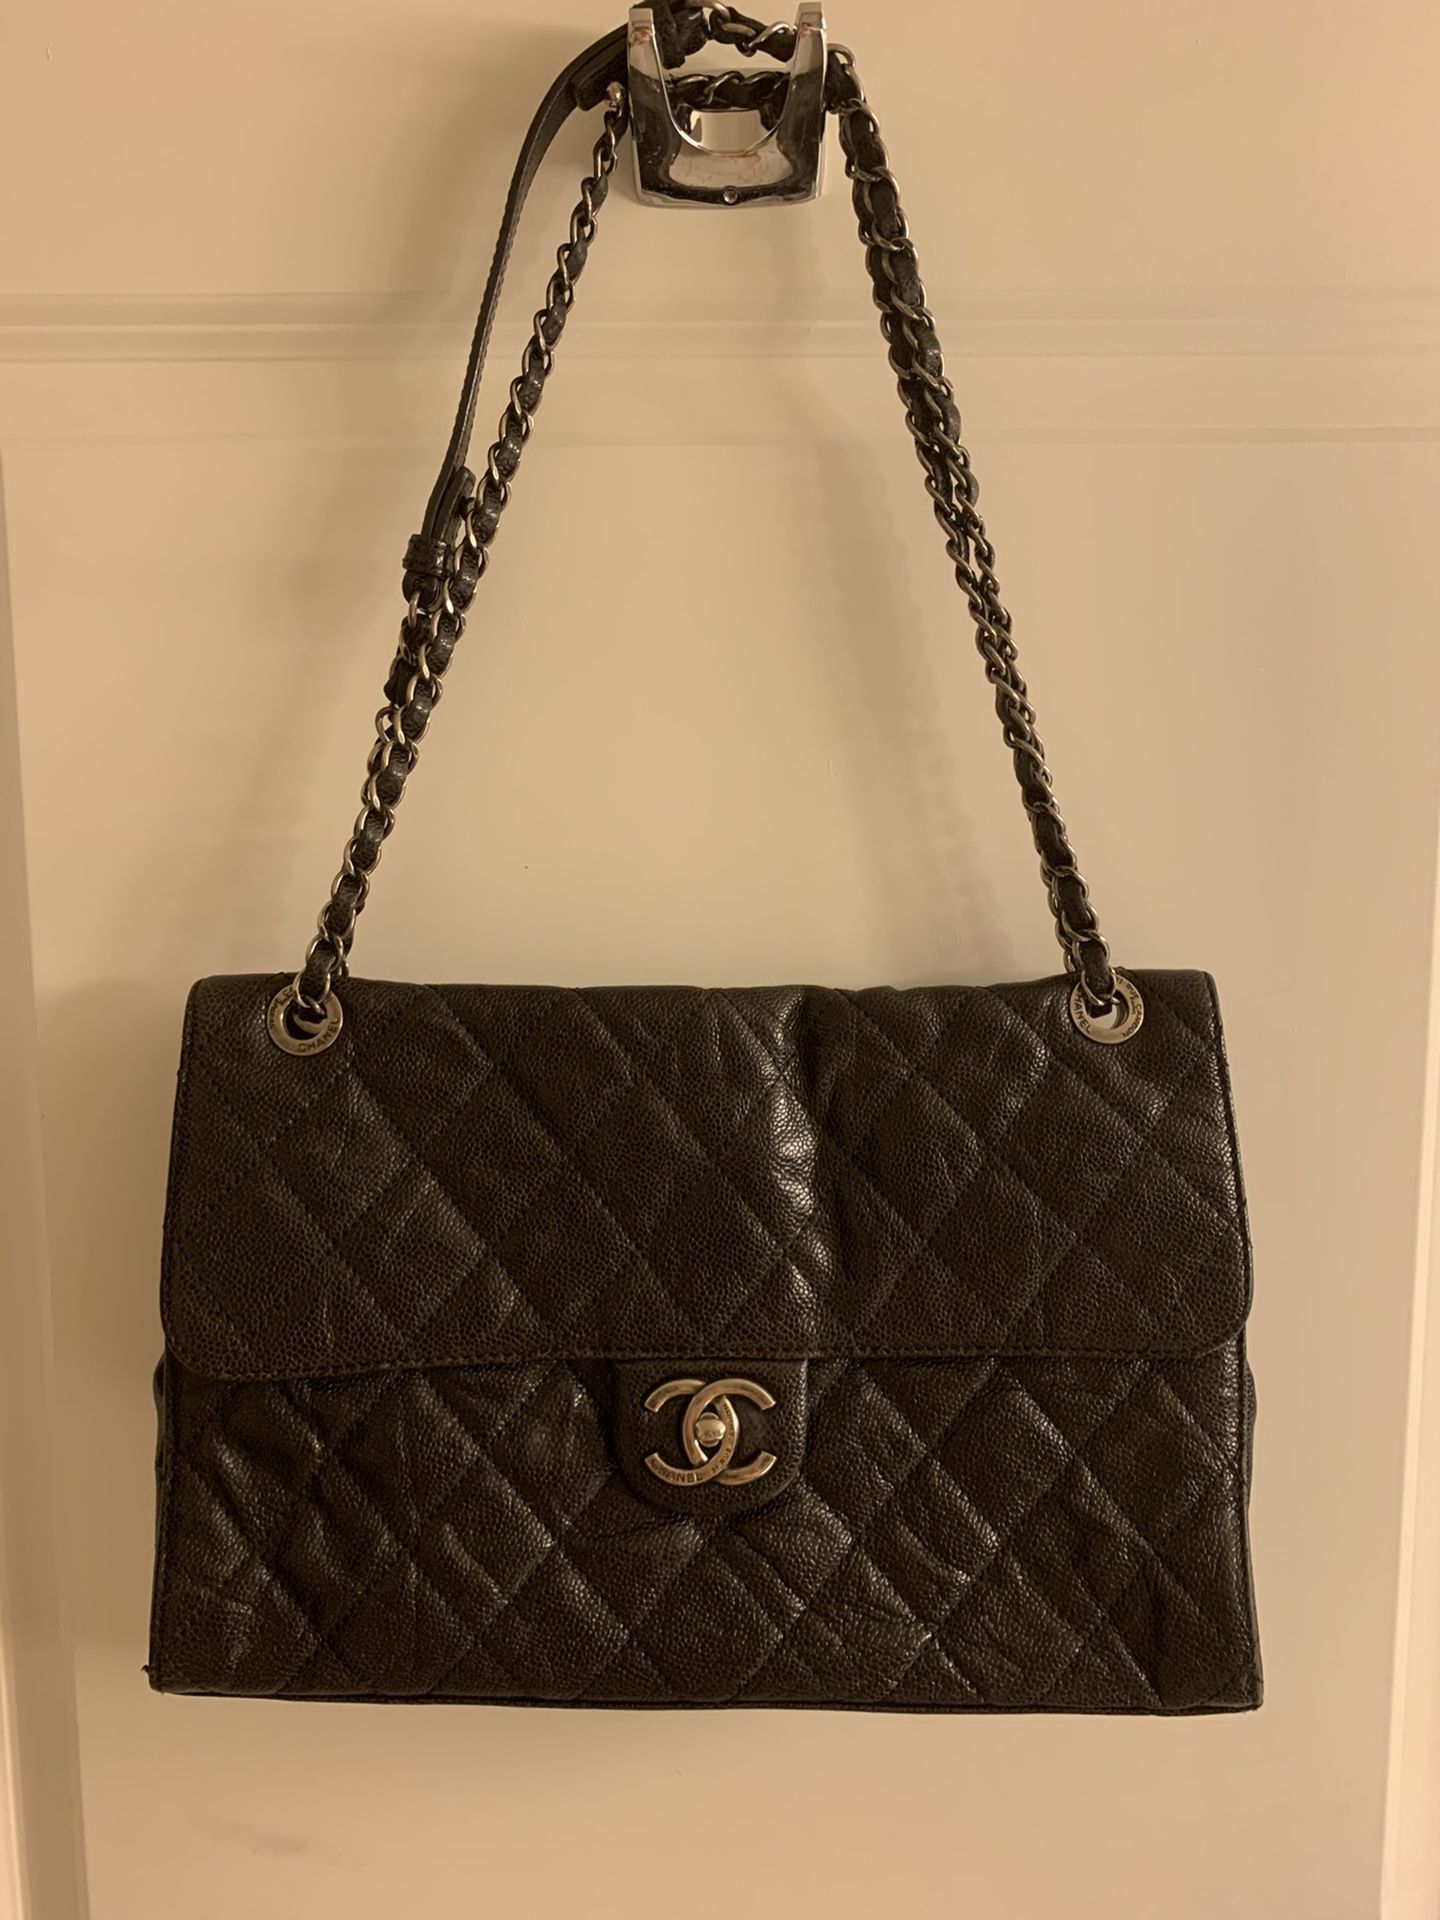 Classic chanel bag Authentic with the card. Excellent shape